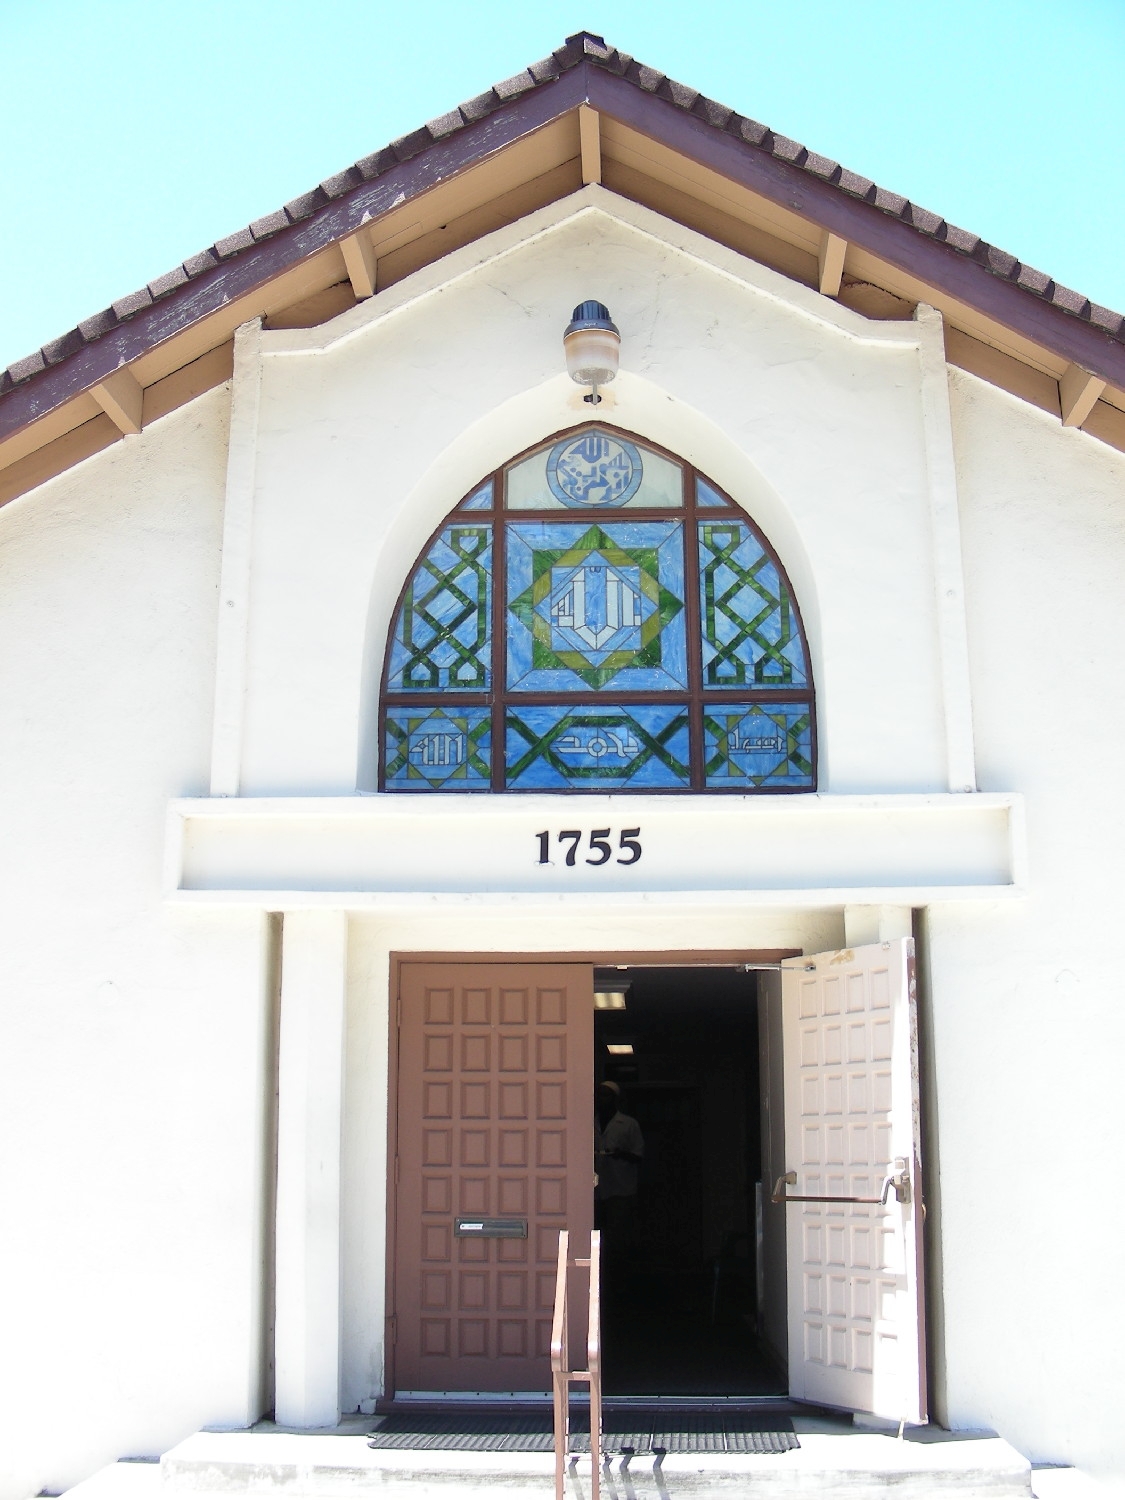 Main entrance, with stained glass window above